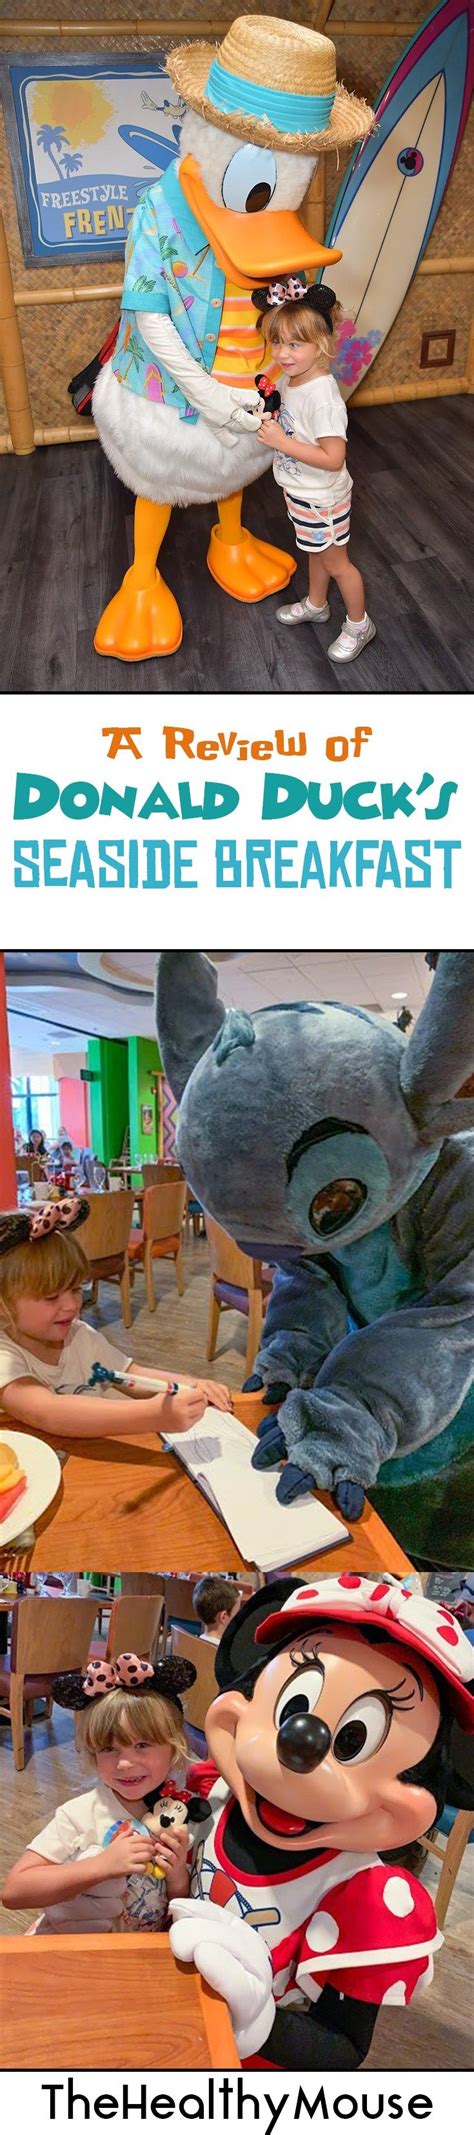 Donald Duck’s Seaside Breakfast Gave Us the Most Amazing Experience